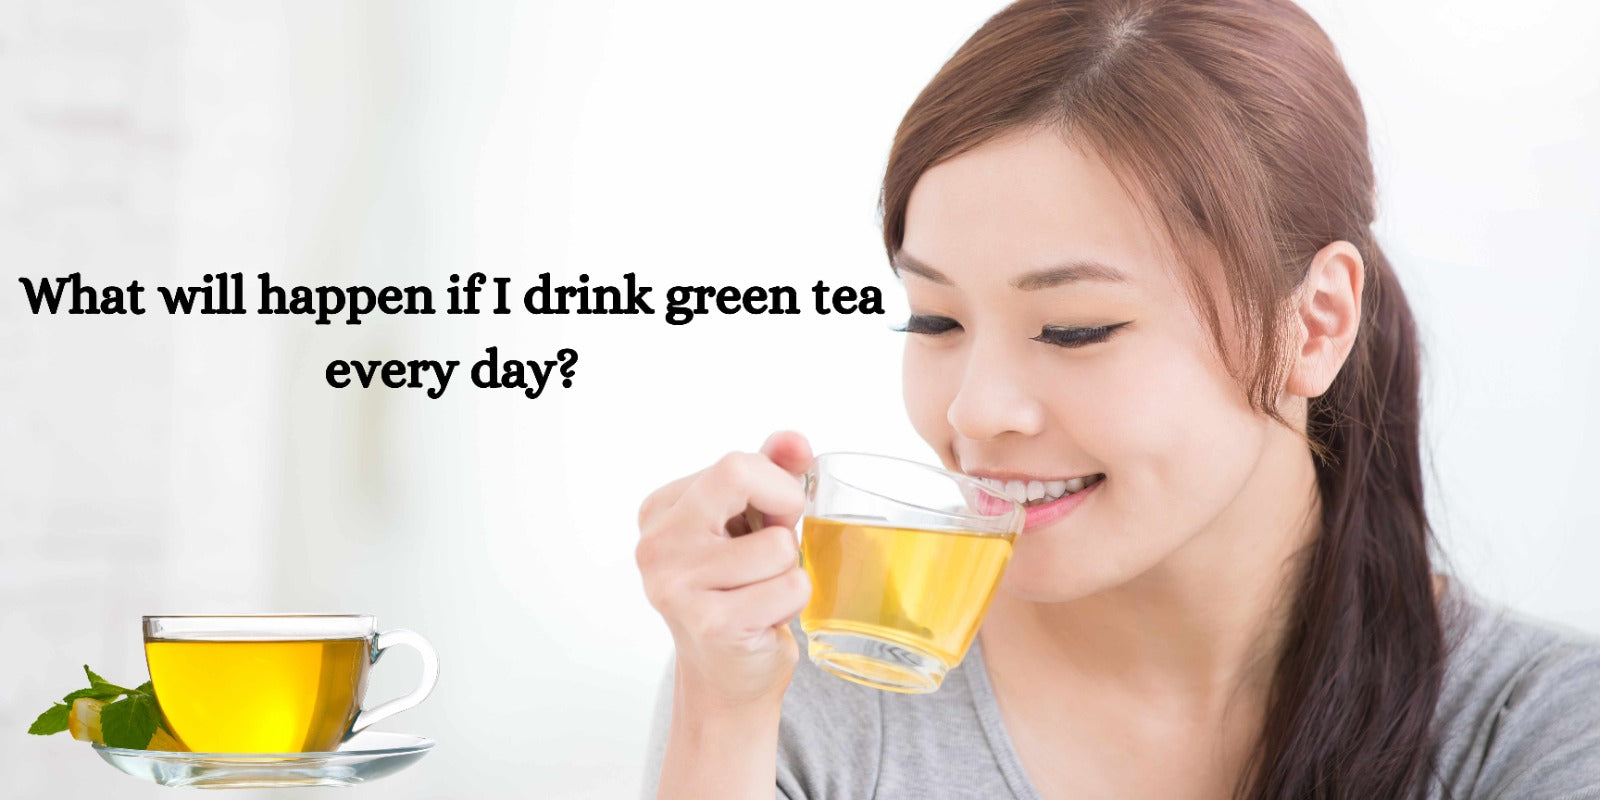 What will happen if I drink green tea every day?